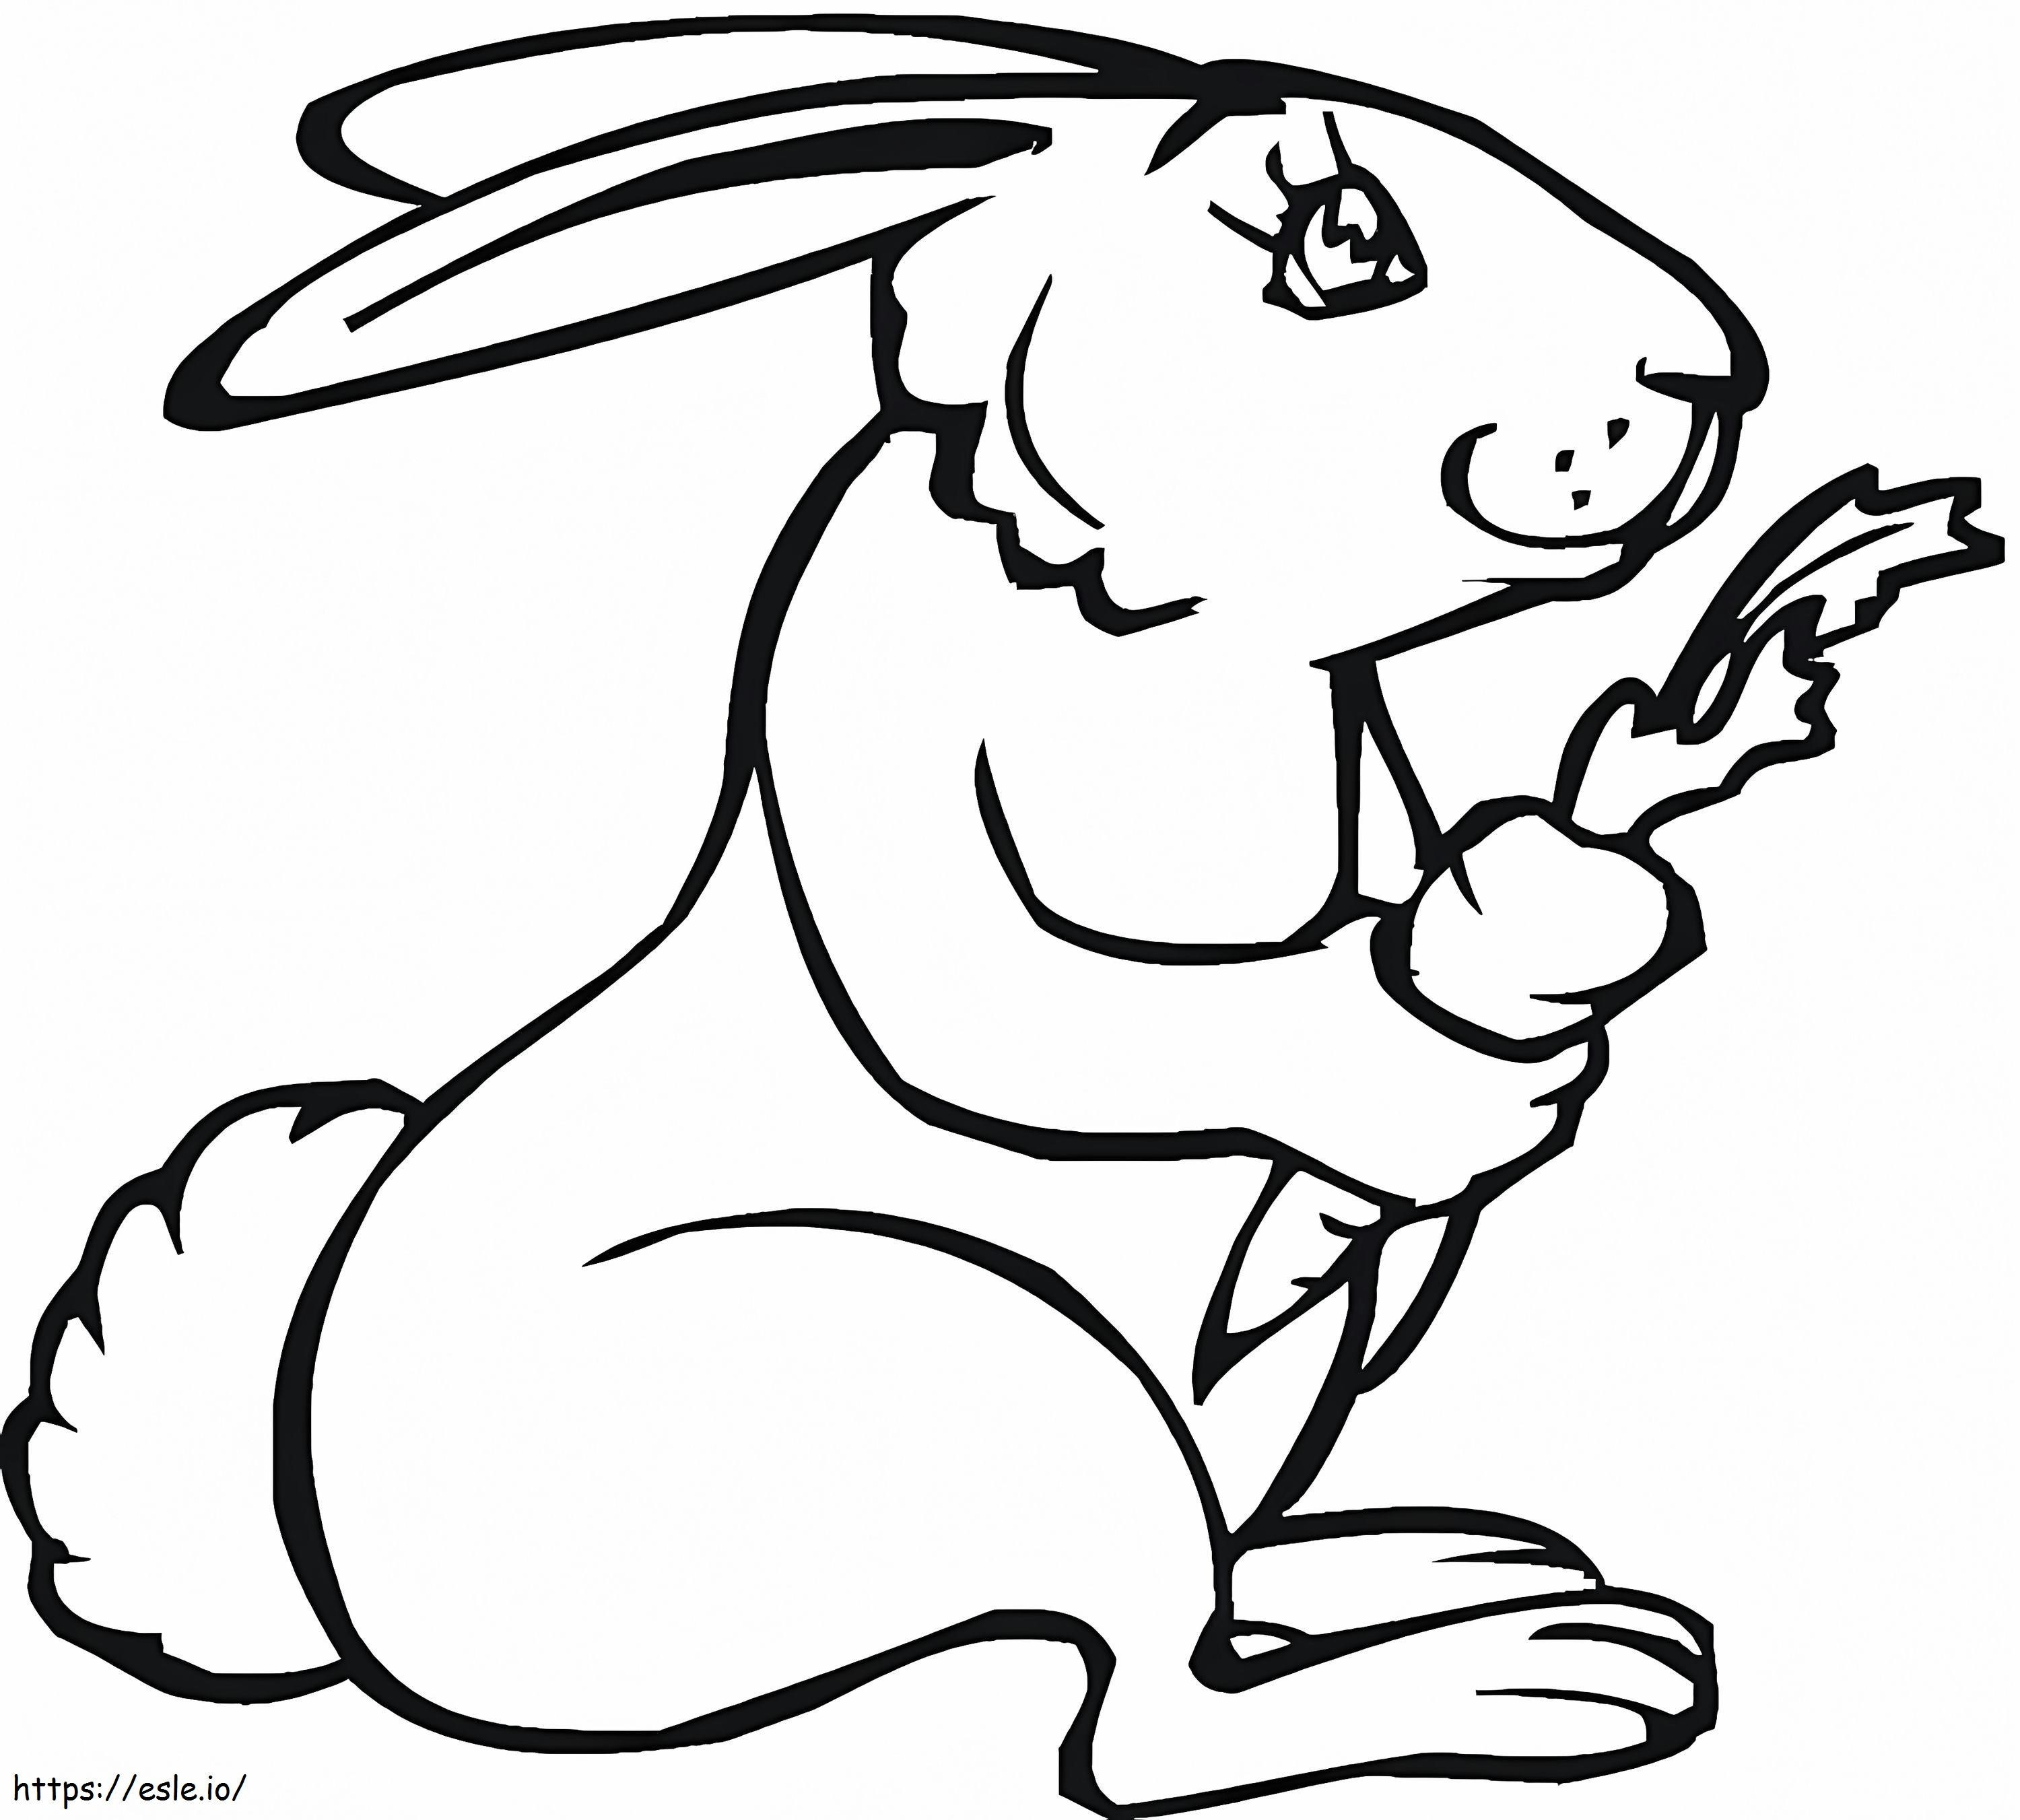 Rabbit Holding A Carrot In His Hand coloring page